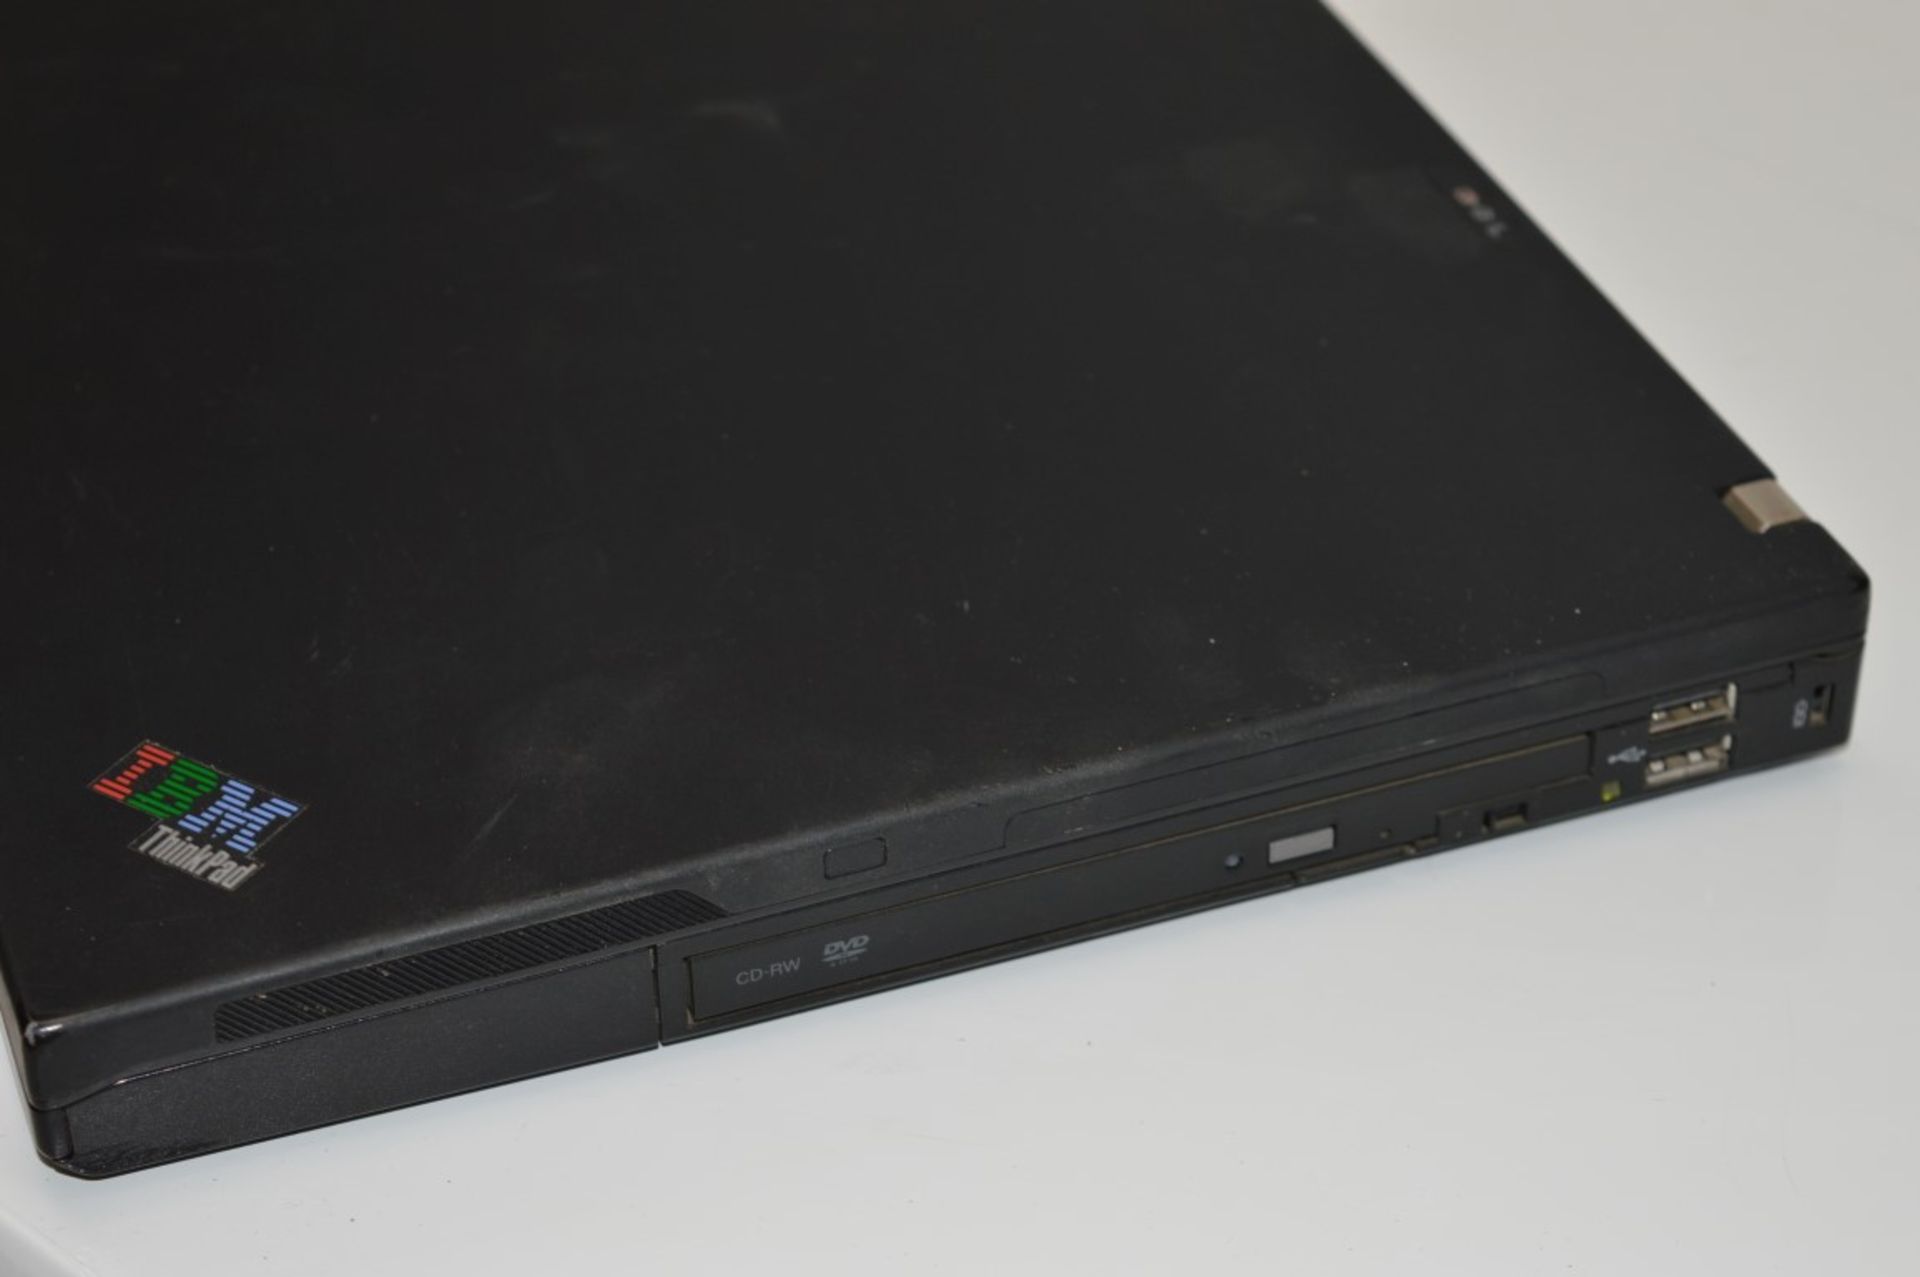 1 x IBM Lenovo T60 14.1 Inch Laptop Computer With Intel Core Duo 1.66ghz Processor and 4gb Ram - - Image 5 of 5